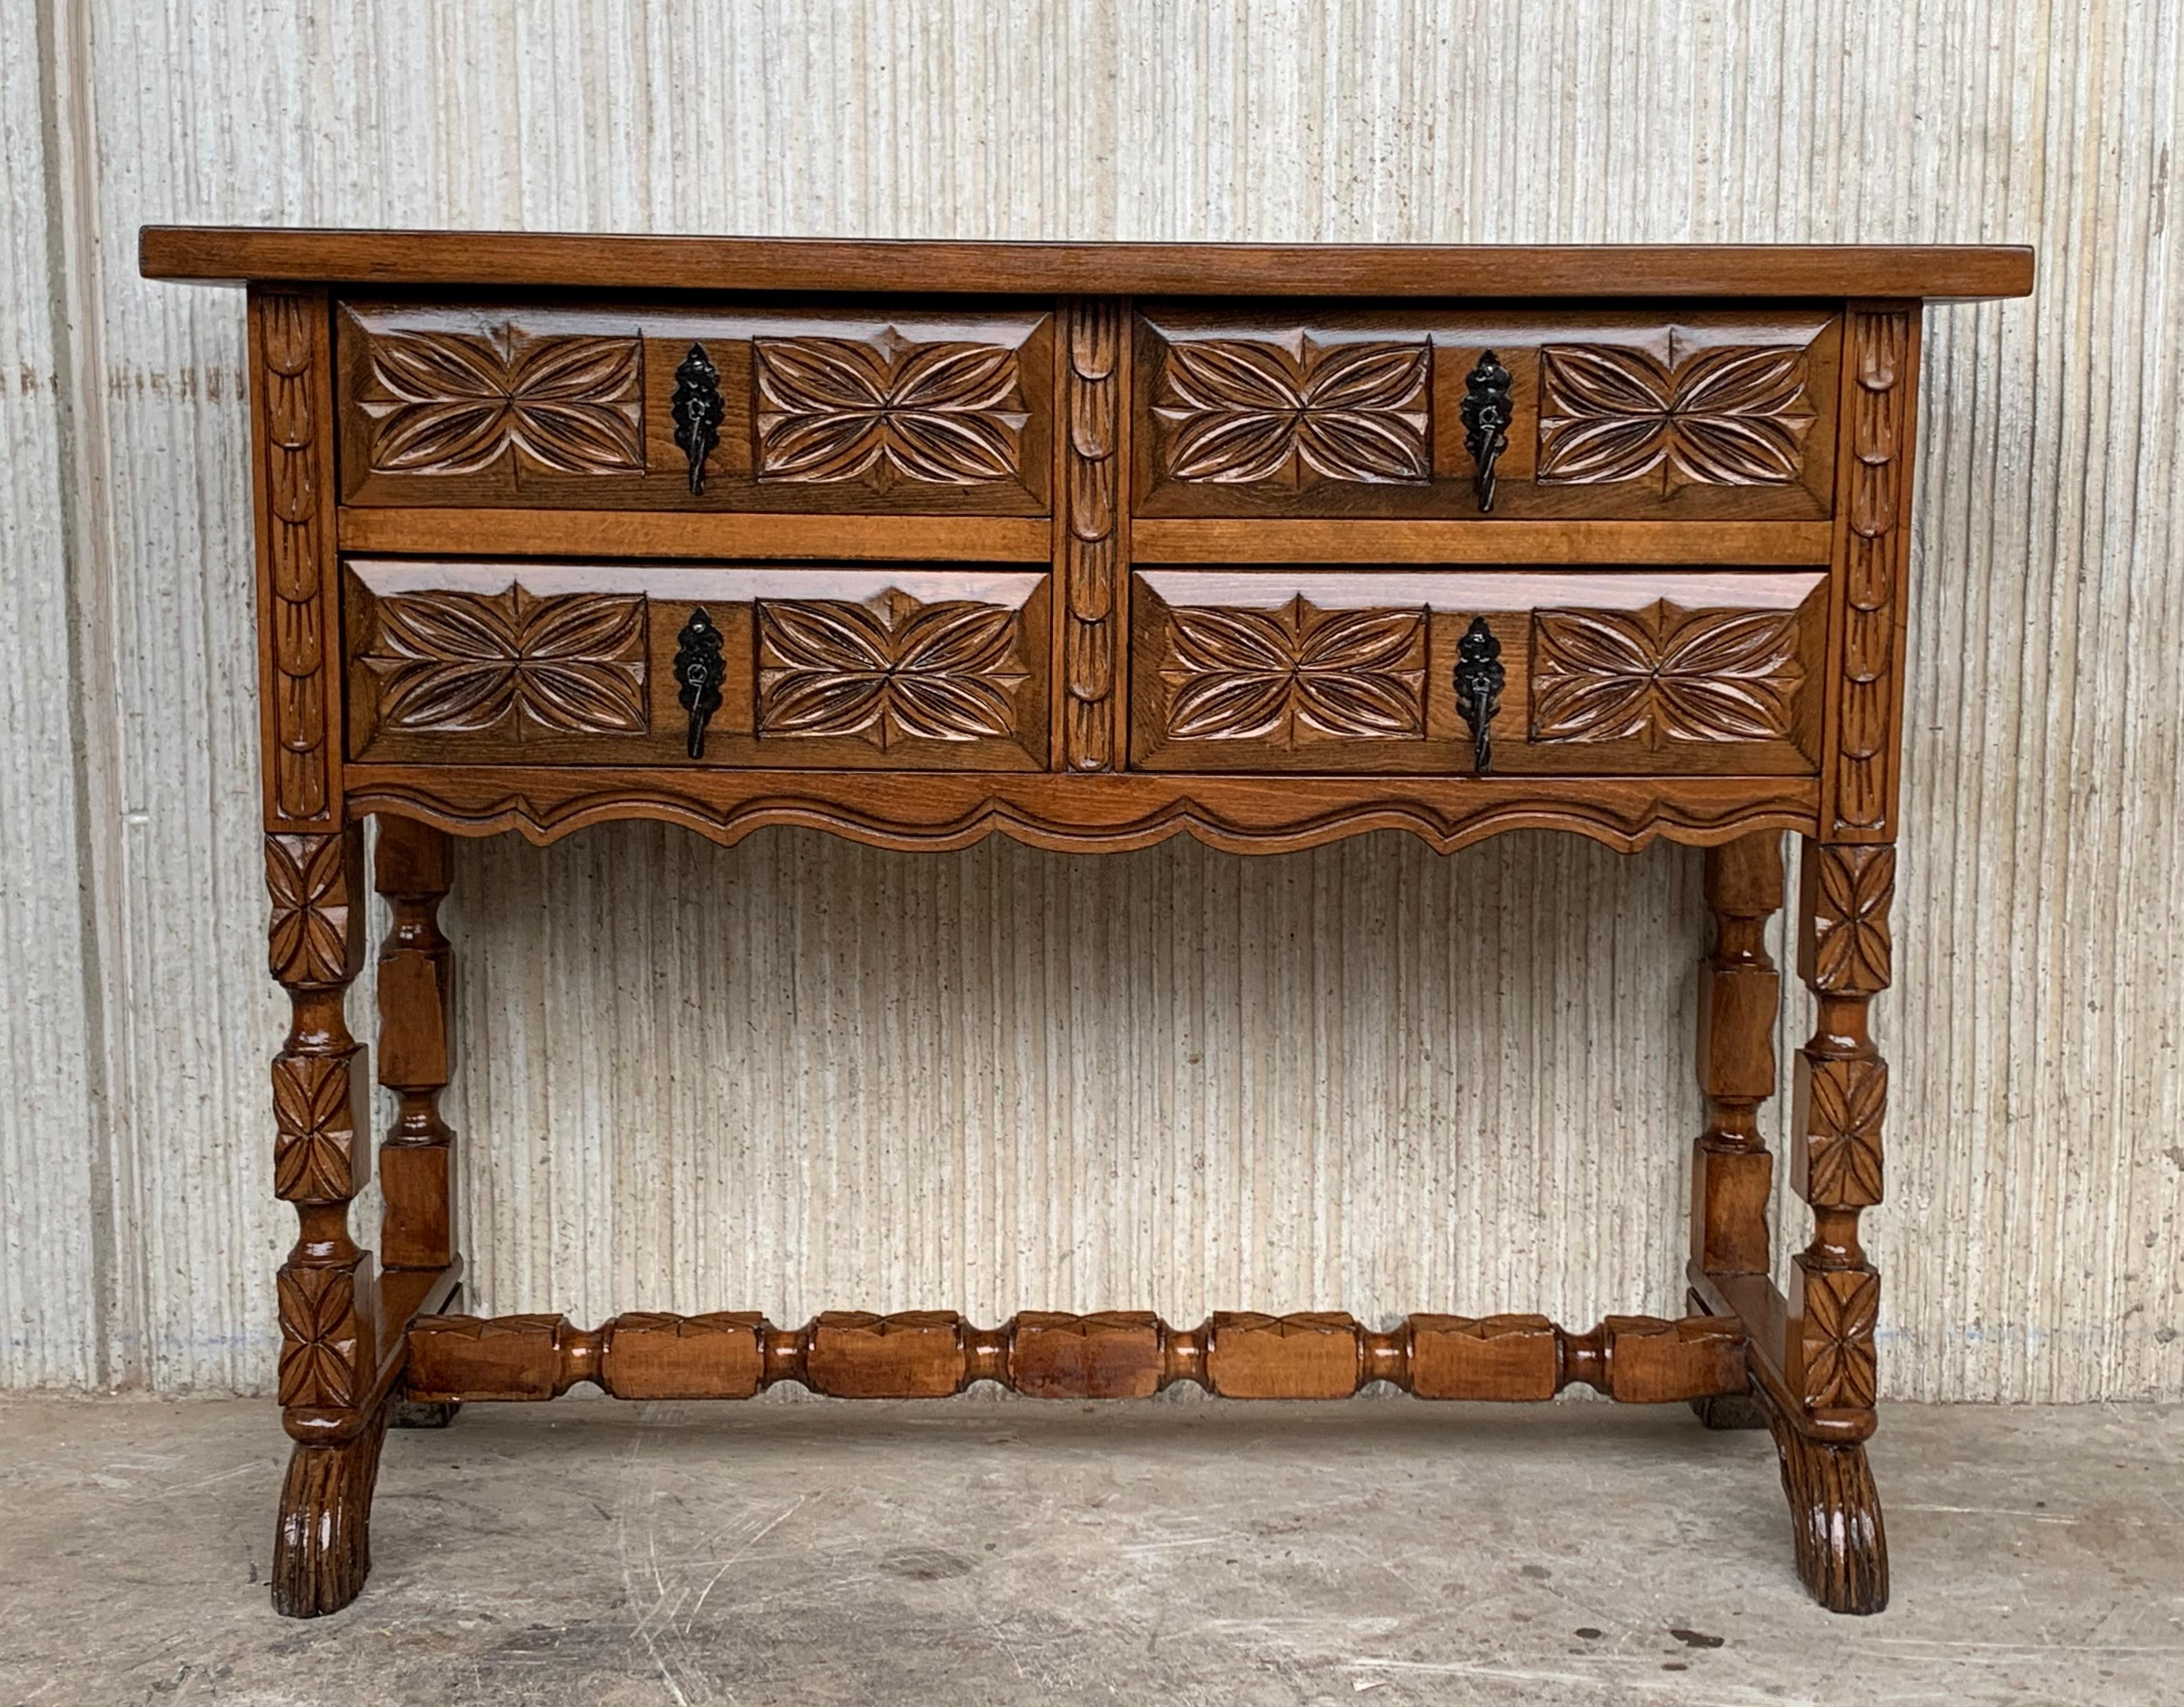 19th century Spanish antique walnut console sofa table with the four drawers and original iron hardware.
You can use like a commode or chest of drawers
This elegant console was crafted in Spain, circa 1890. The sofa table with four legs features a